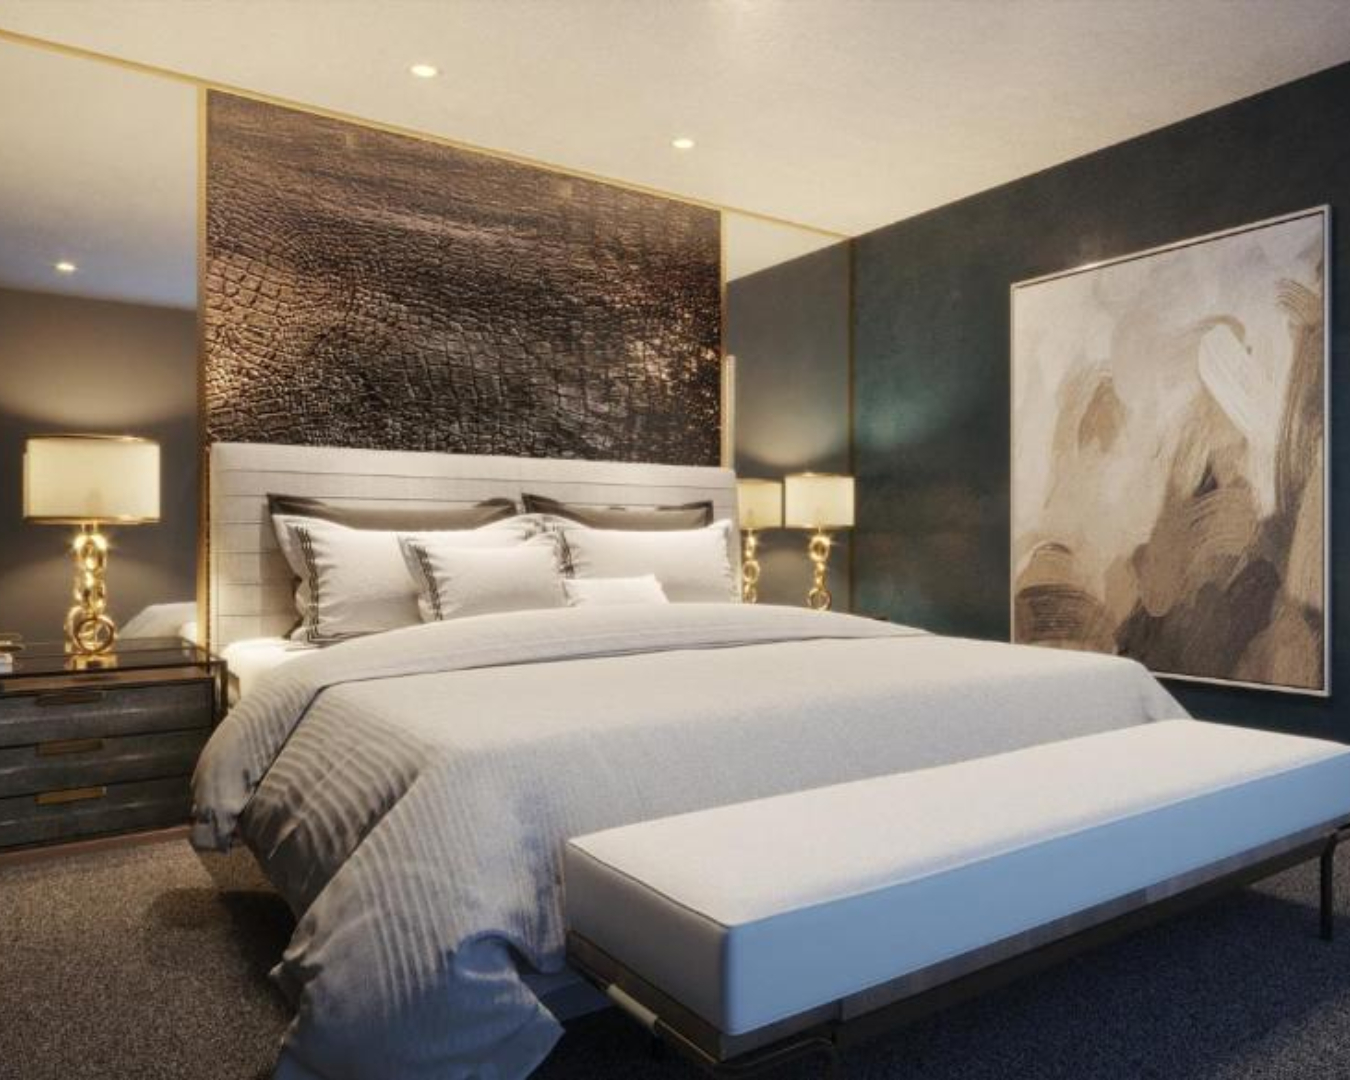 One of the apartments at Whitewood Suites shows off a huge bed, abstract wall art and luxurious gold-detaileddecor 